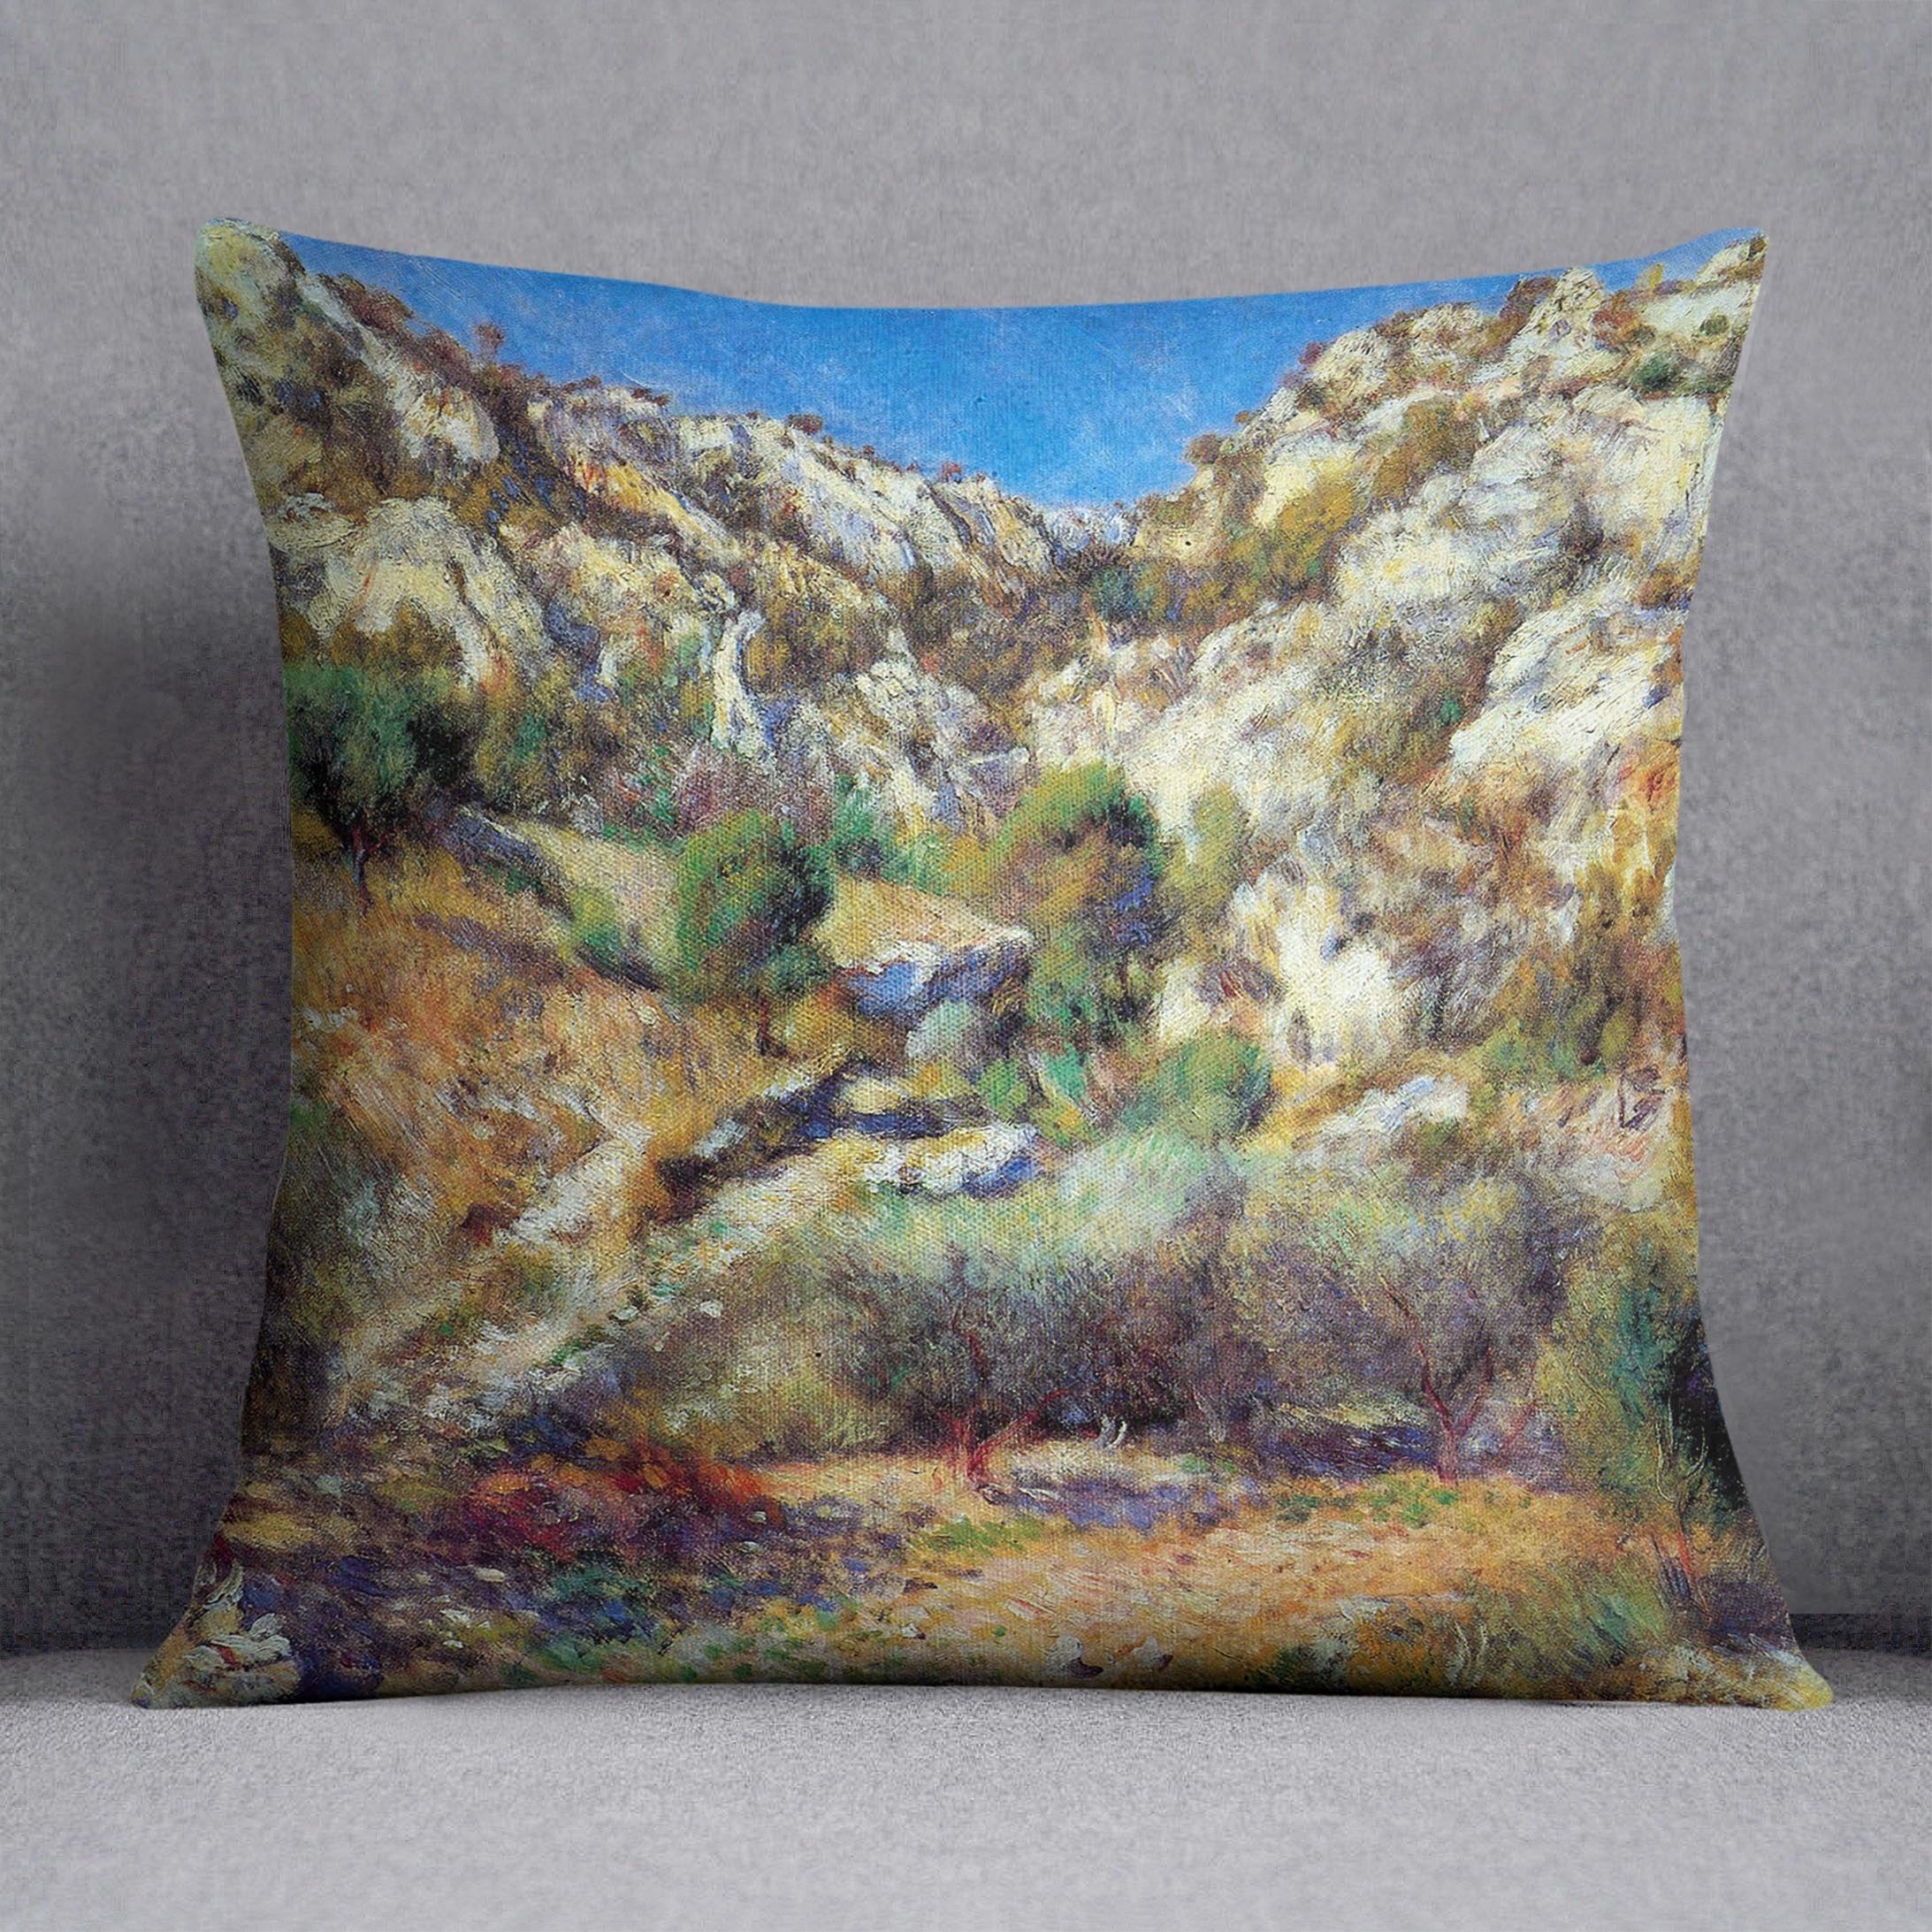 Rocks at LEstage by Renoir Throw Pillow